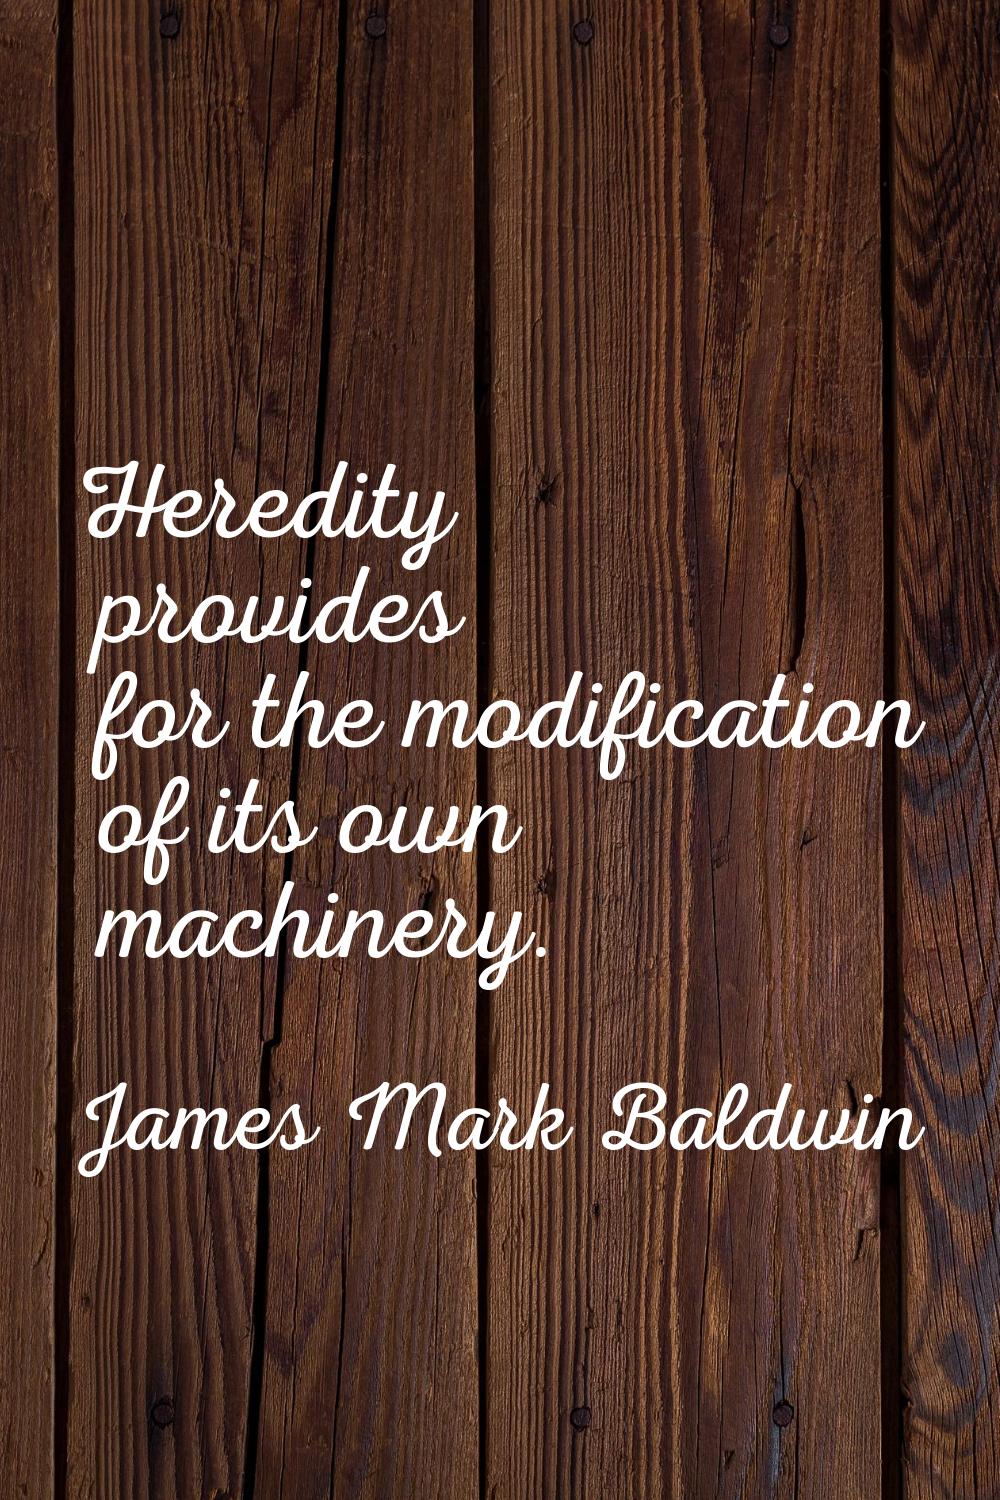 Heredity provides for the modification of its own machinery.